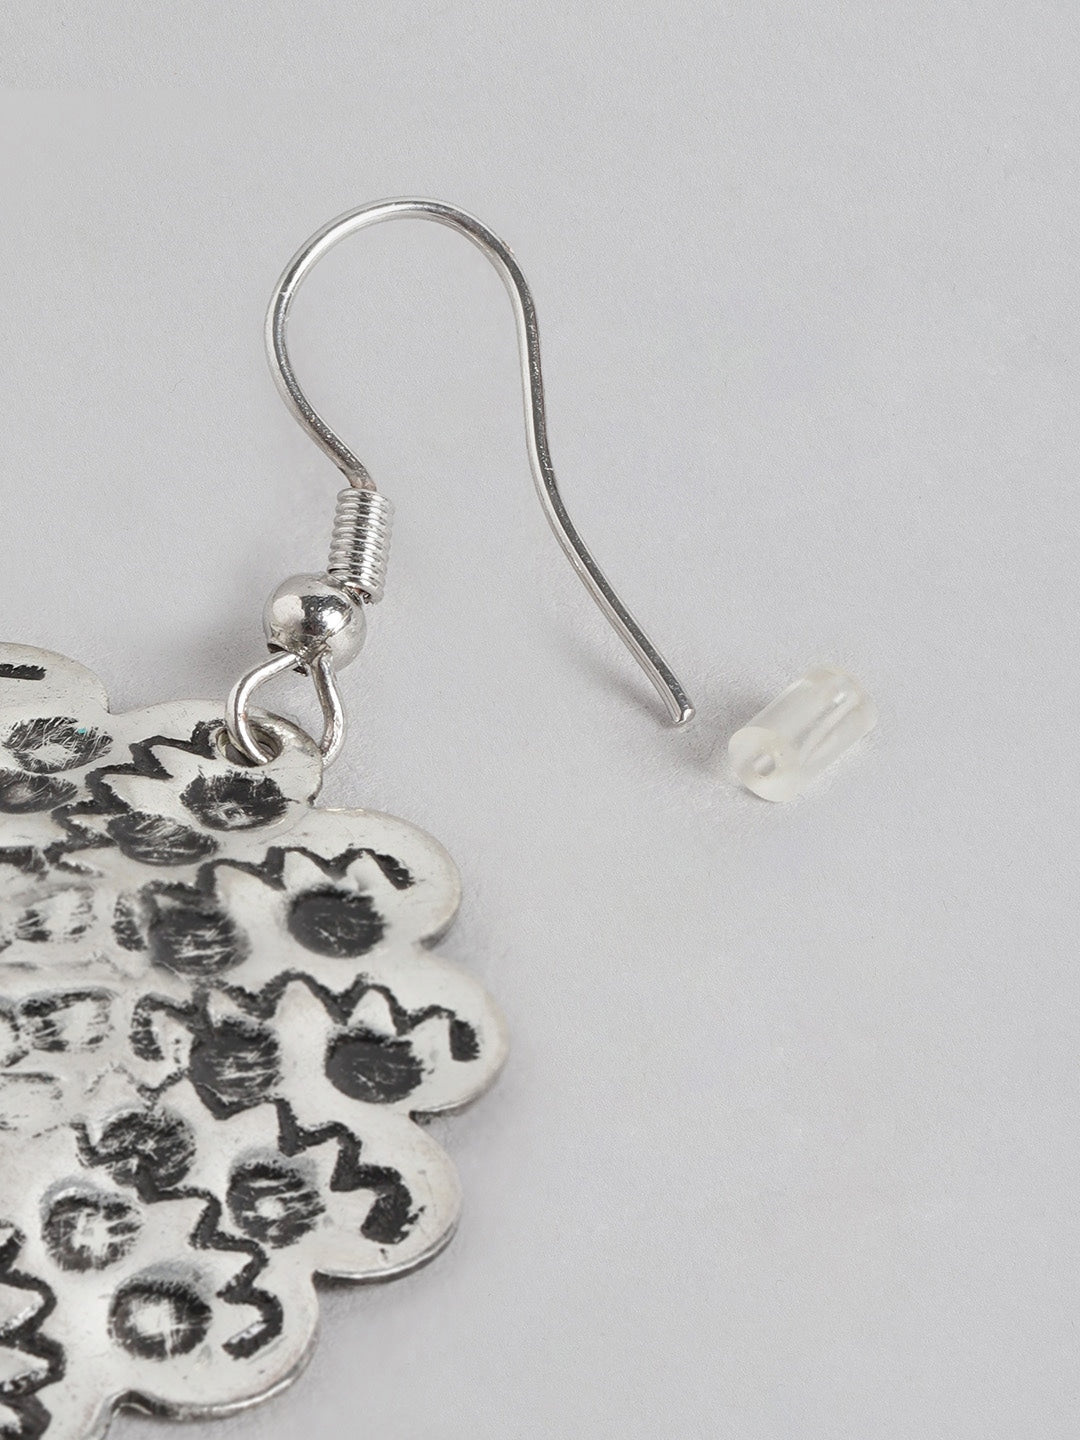 Silver-Plated Floral Drop Earrings